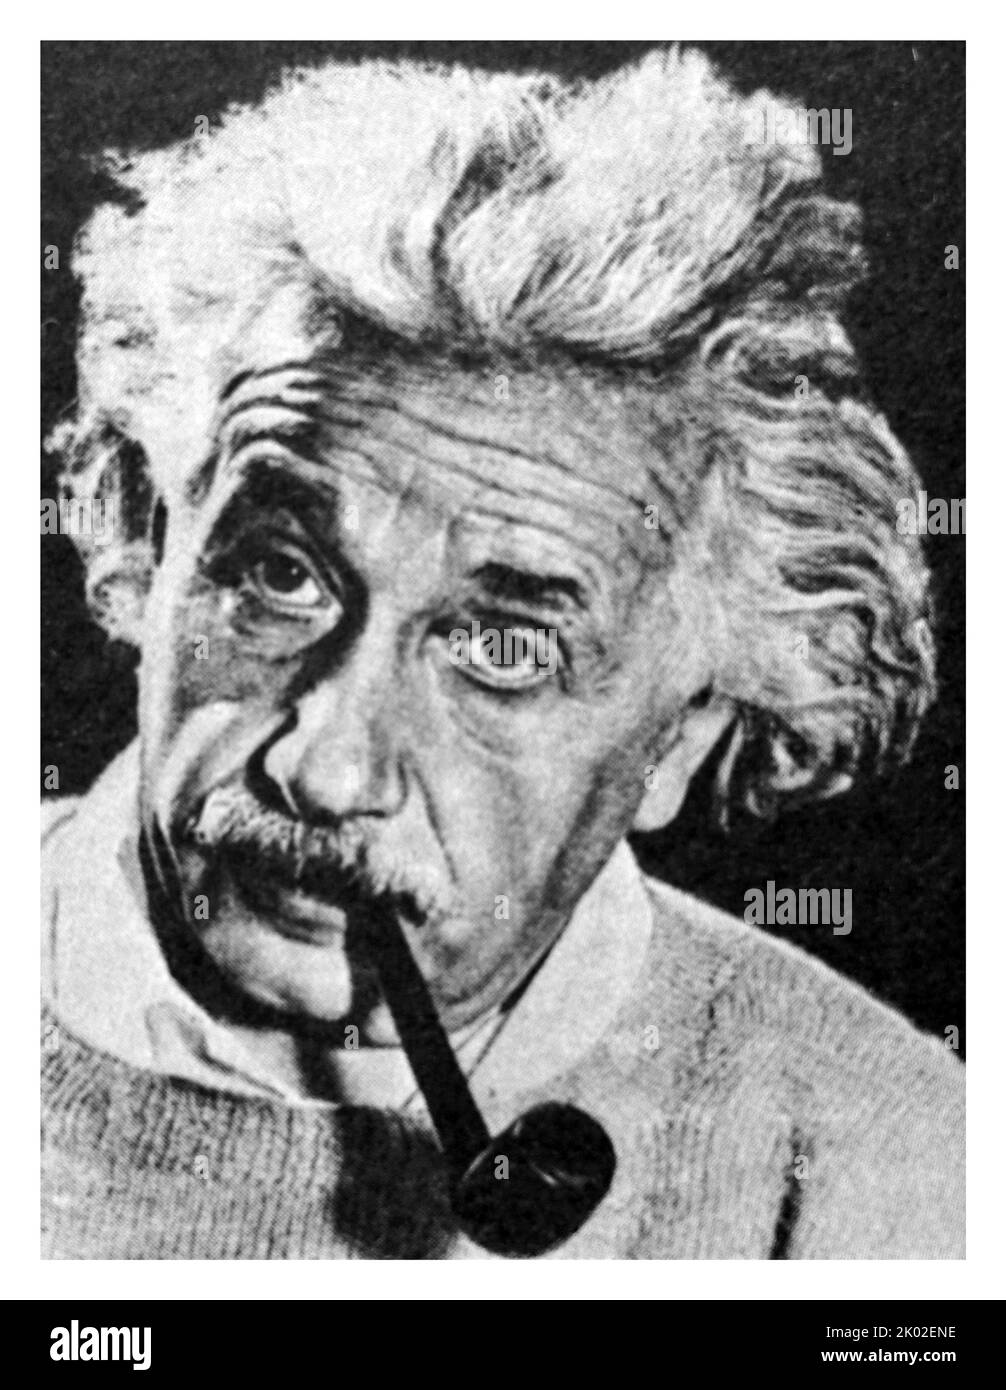 Albert Einstein (1875-1955). Was born in Germany. For a long time he lived in Switzerland and the USA, created the special and general theory of relativity. The author of many works and discoveries. Stock Photo